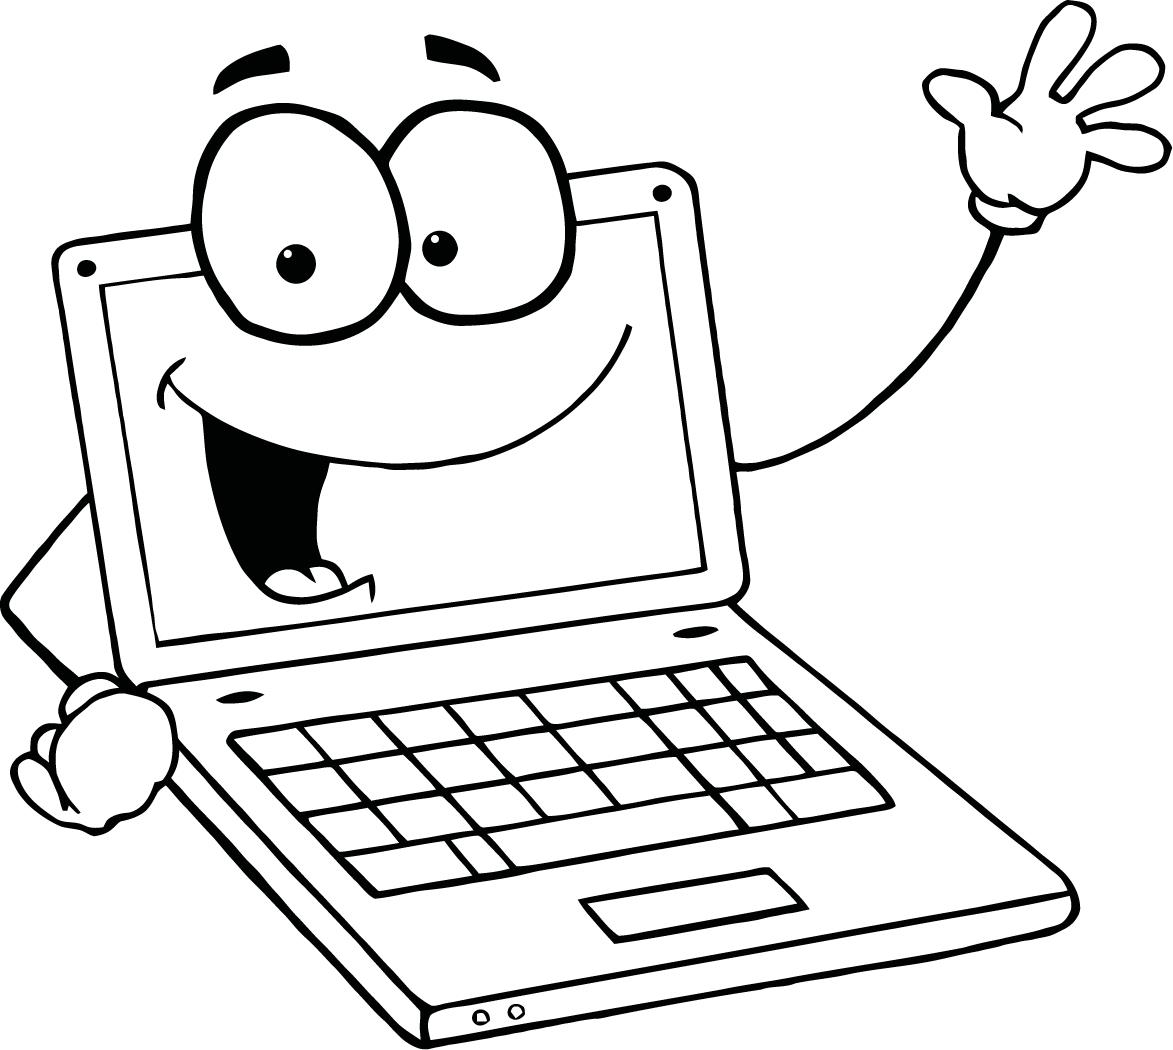 Laptop Cartoon Character For Kids   Coloring Page Of A Laptop Cartoon